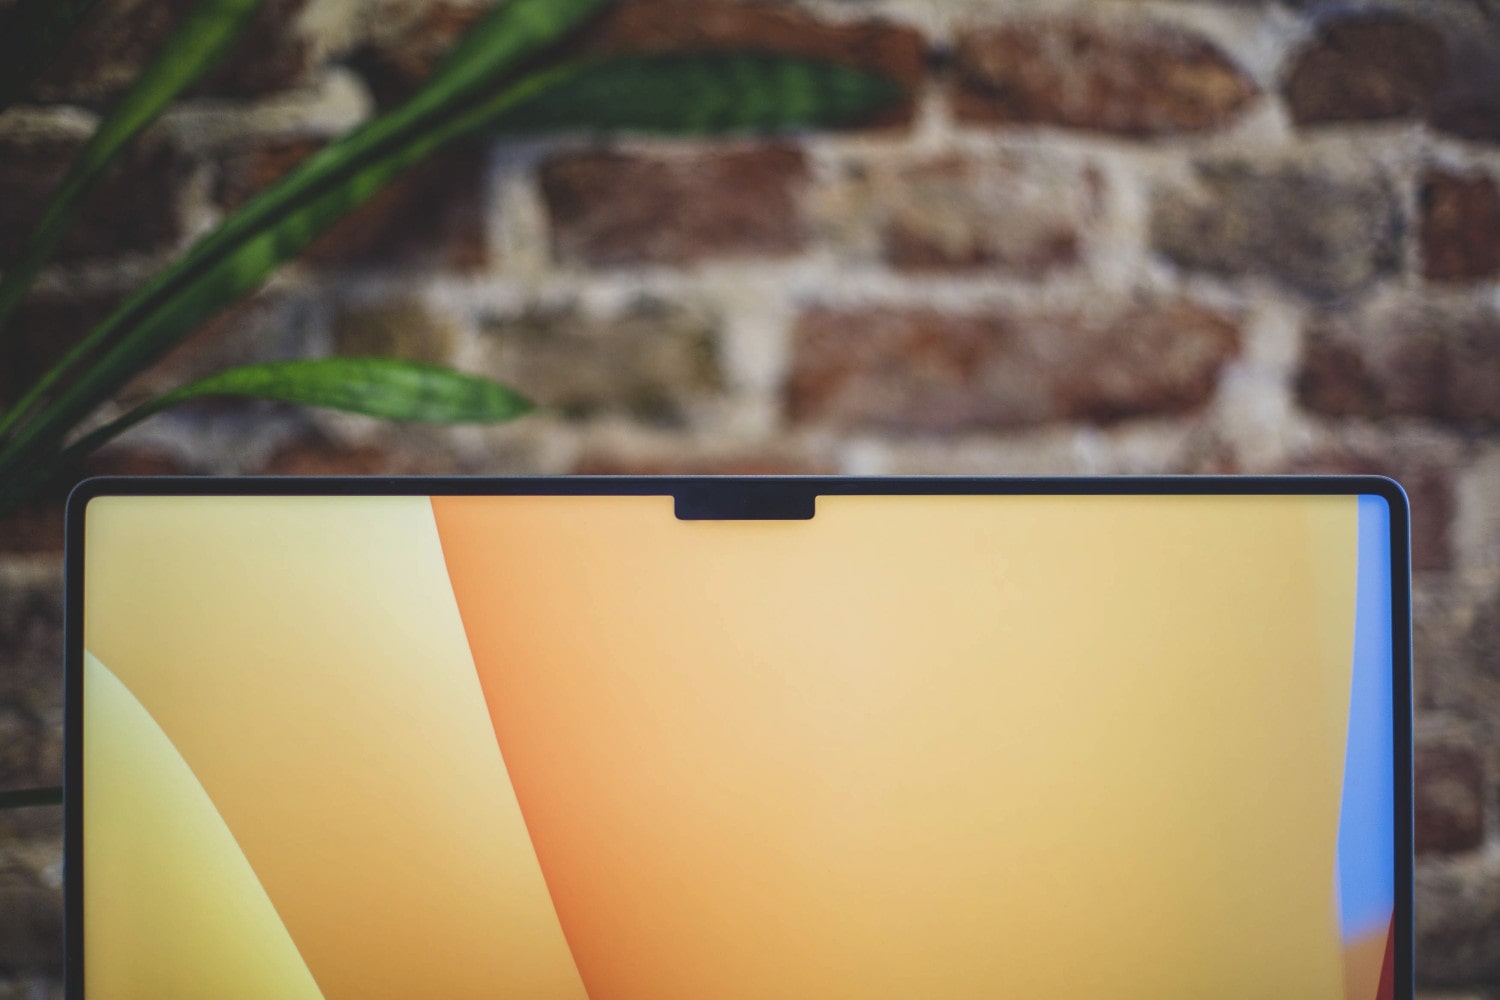 An Apple MacBook laptop with the macOS Ventura background wallpaper and the notch seen at the top of the display.